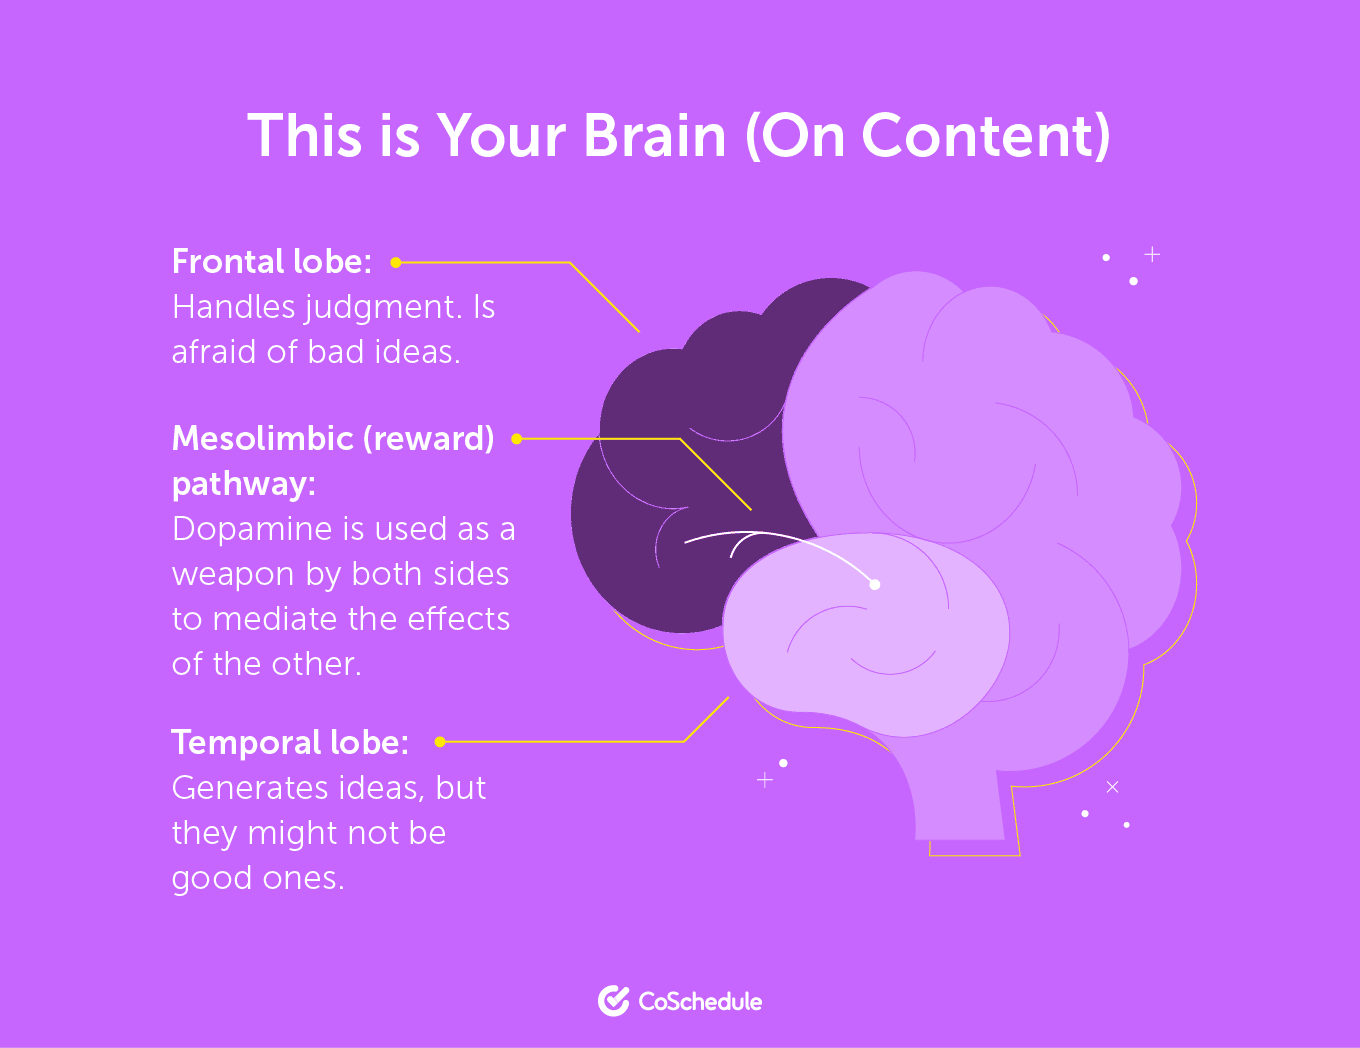 This is Your Brain (On Content)